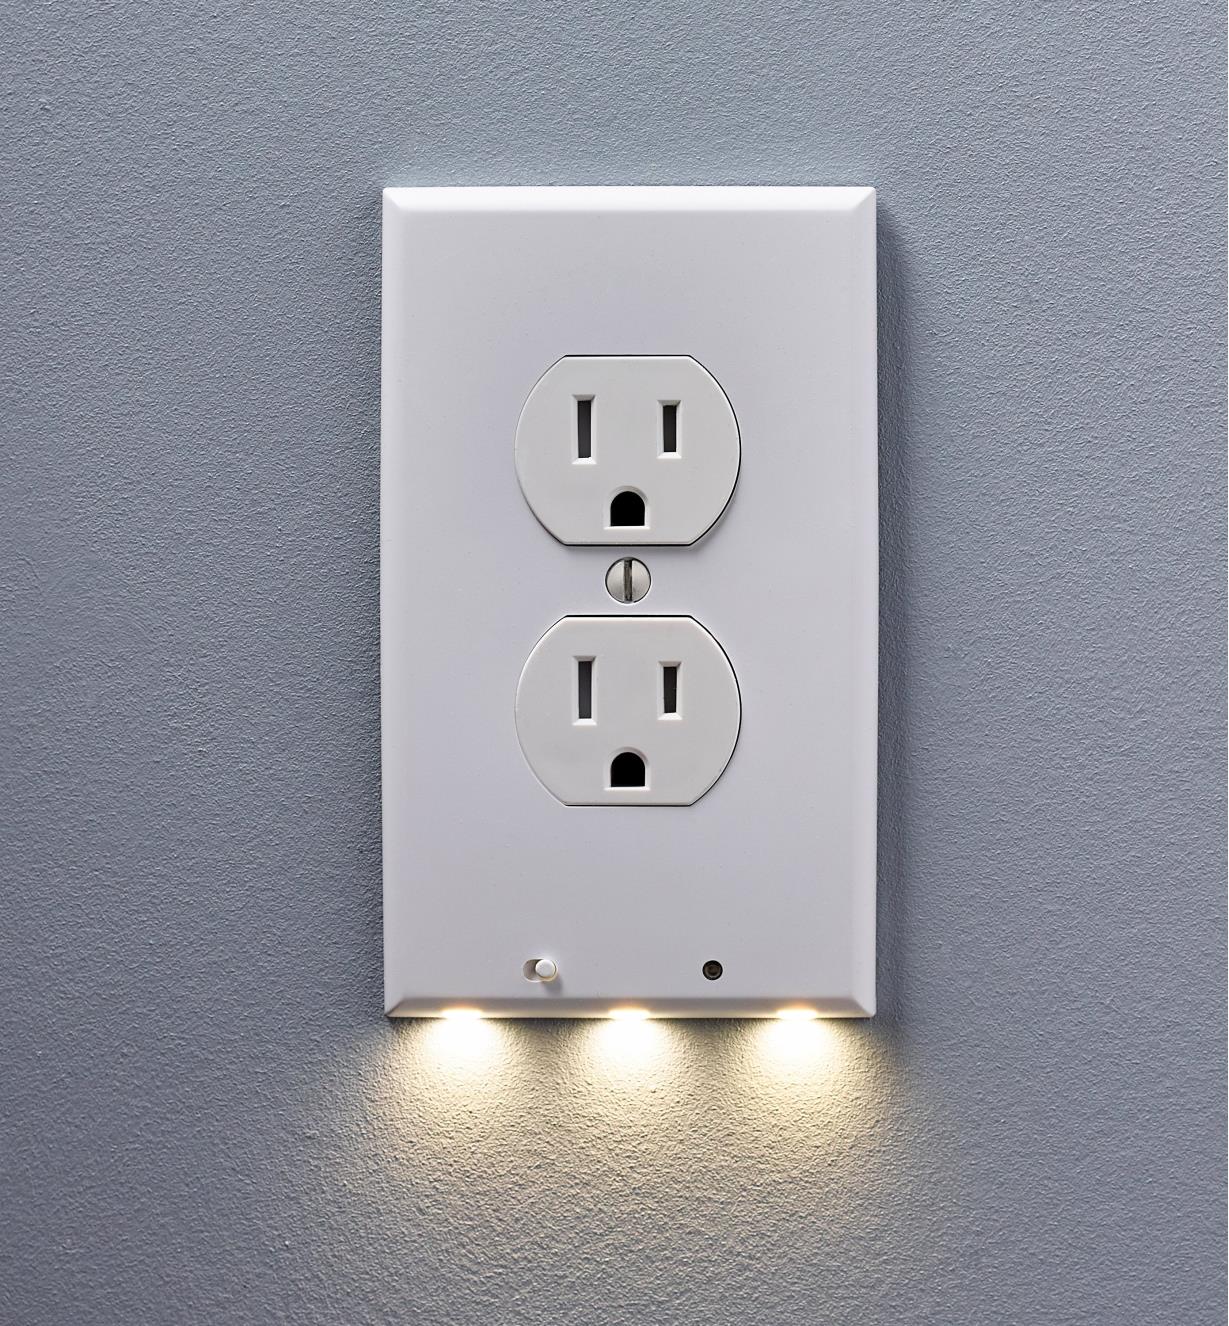 10 Pack Night Angel Duplex Plug Cover Sensor Light  LED Wall Outlet Coverplate 